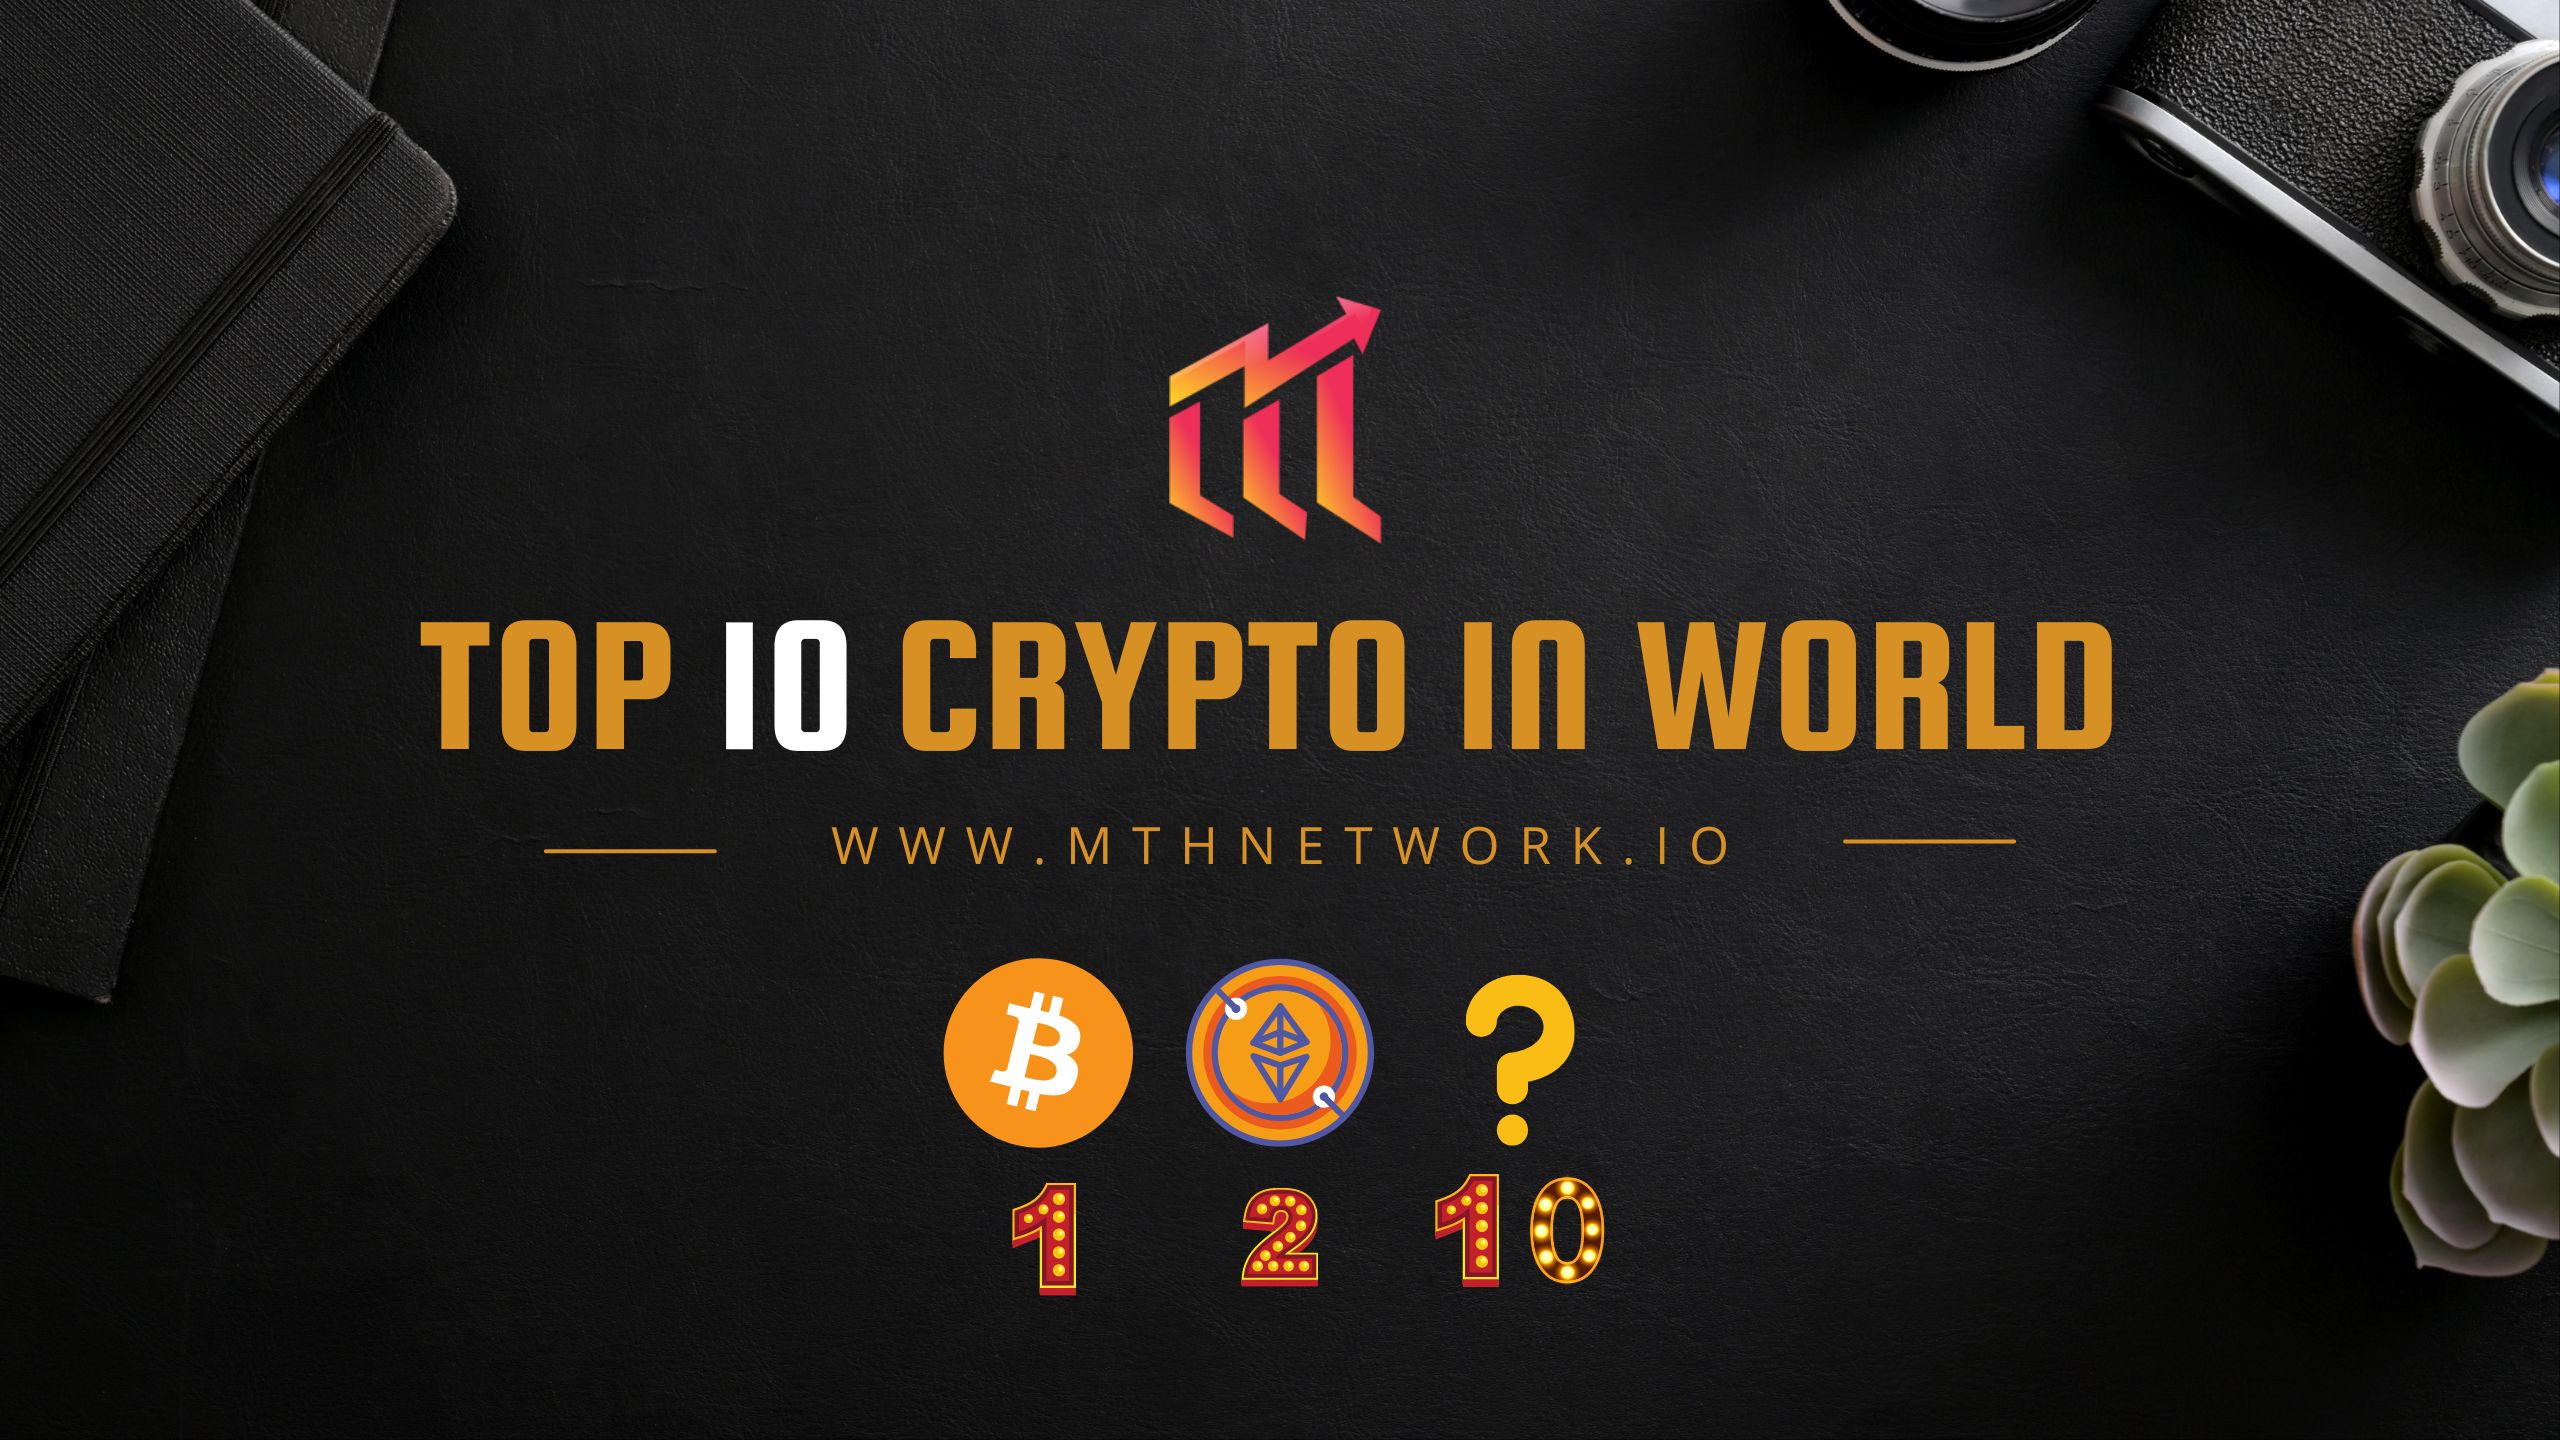 Top 10 Crypto in world